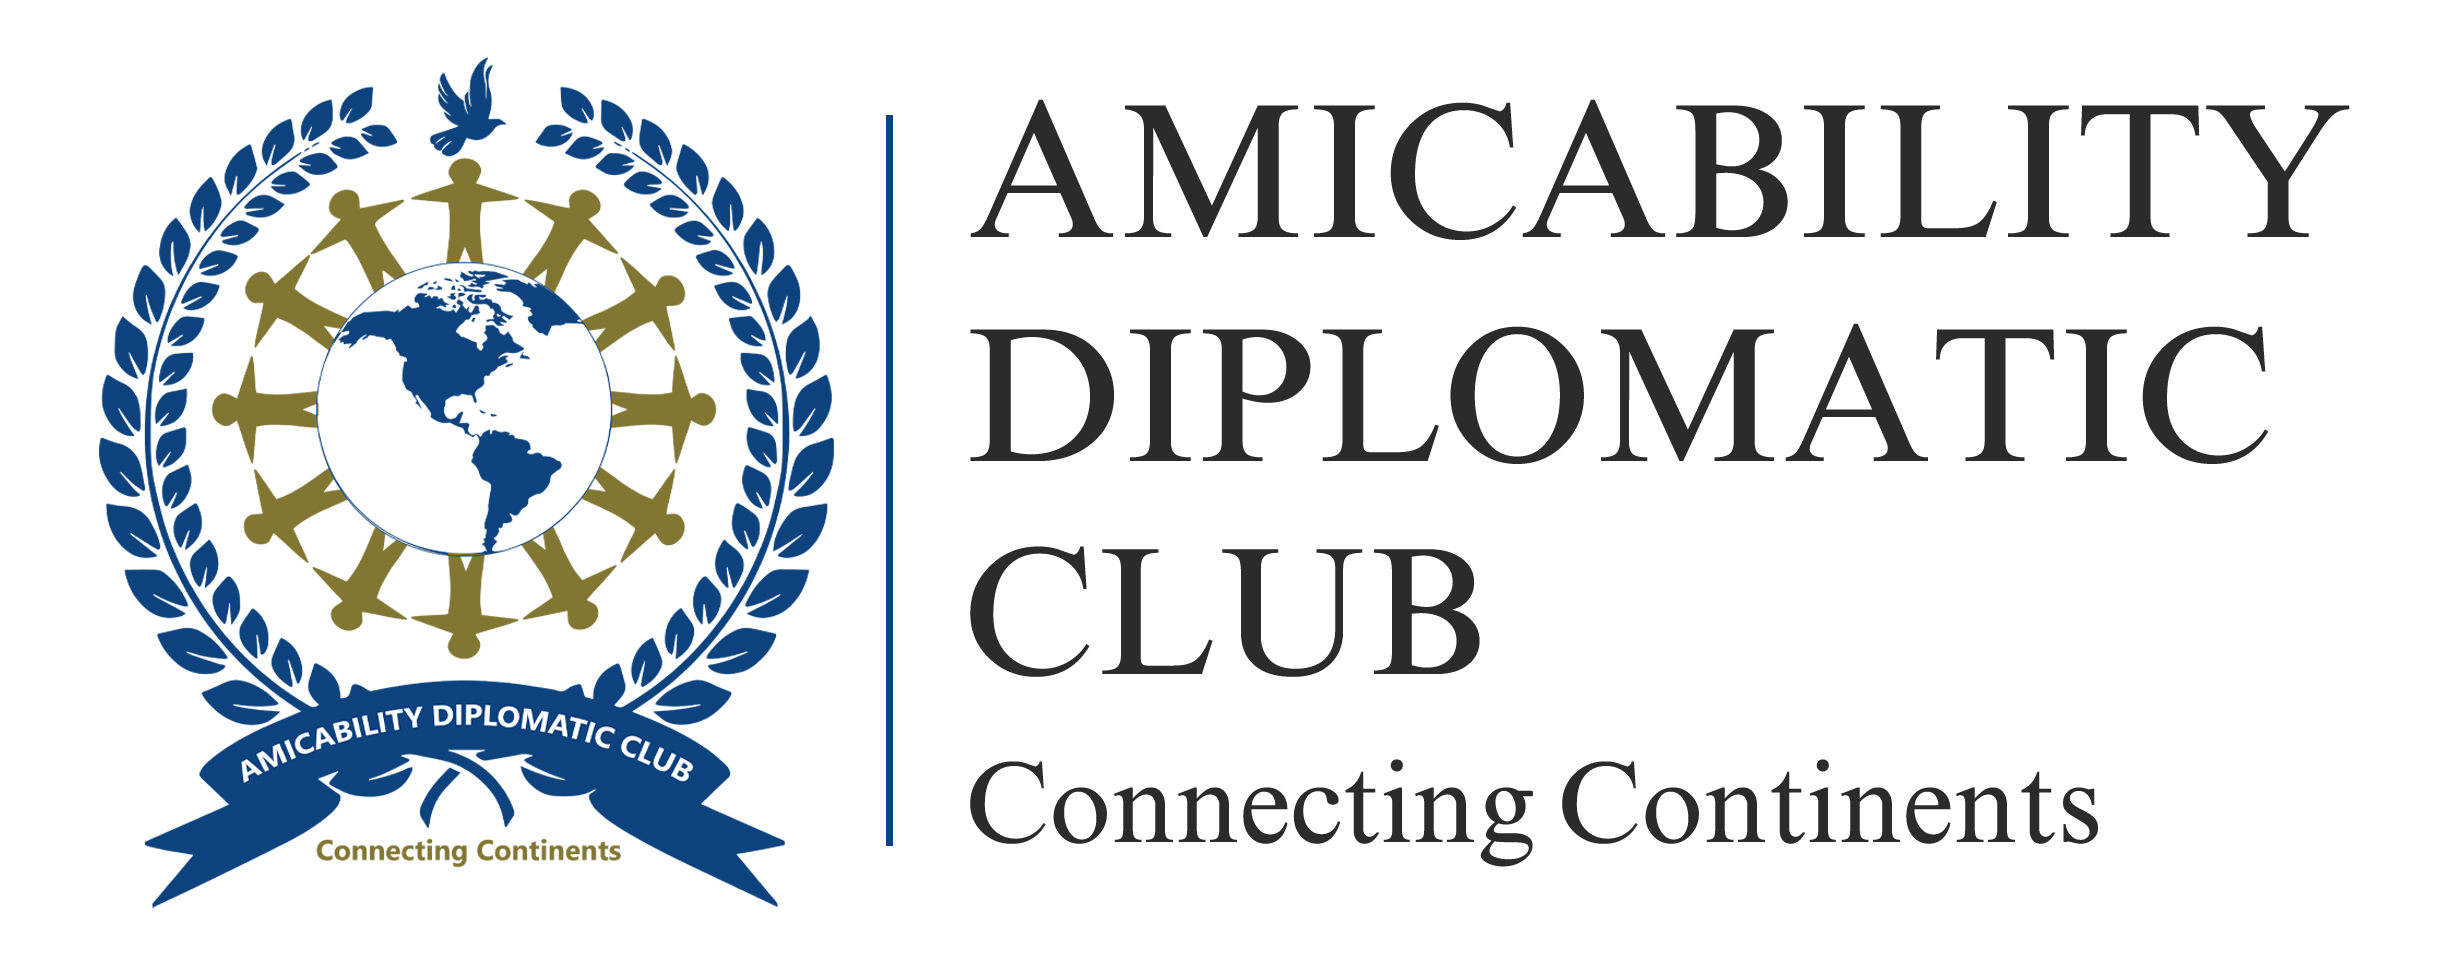 Amicability Diplomatic Club